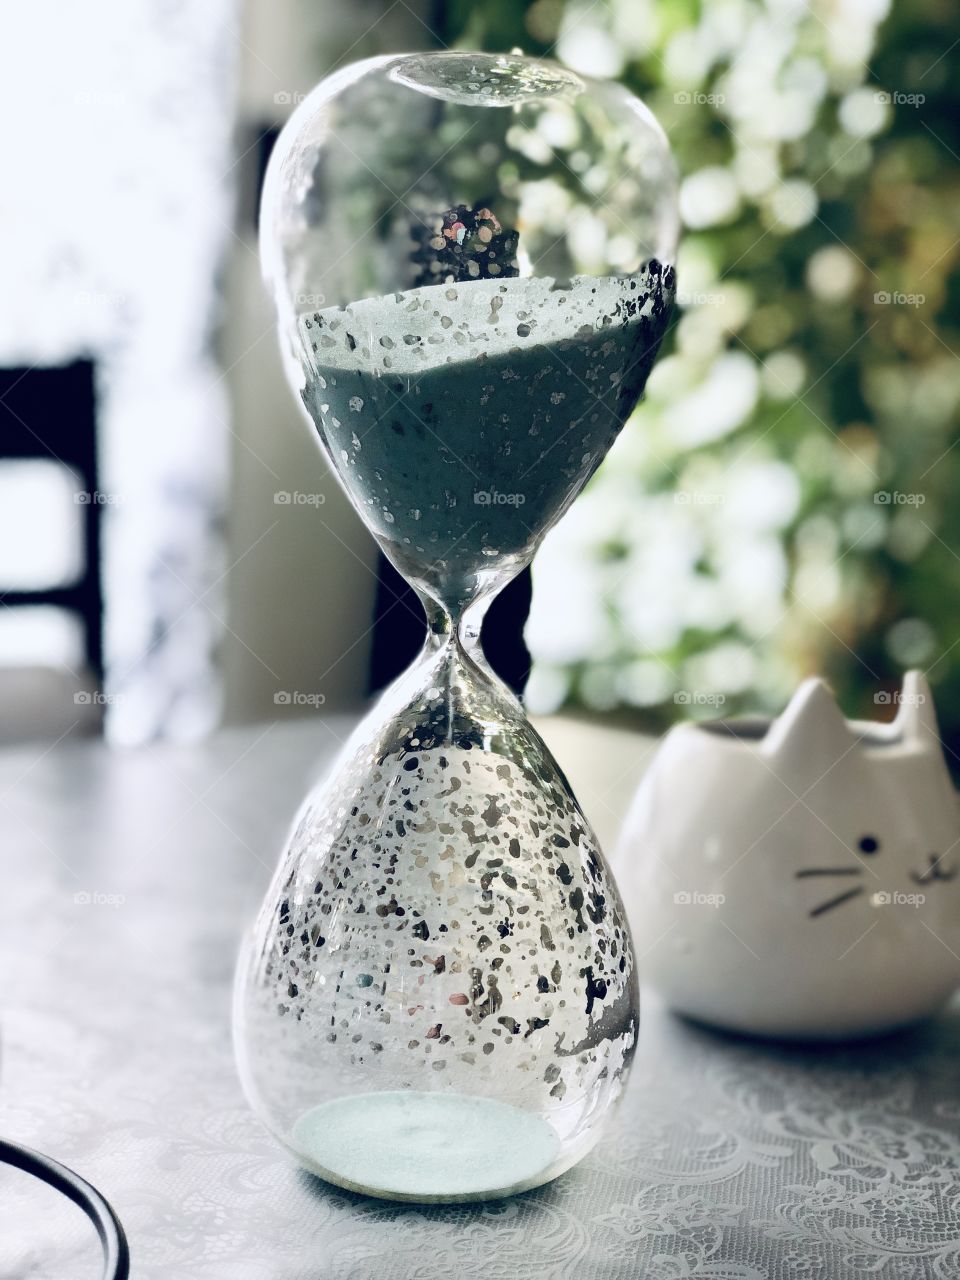 Pretty, little hourglass keeping perfect time